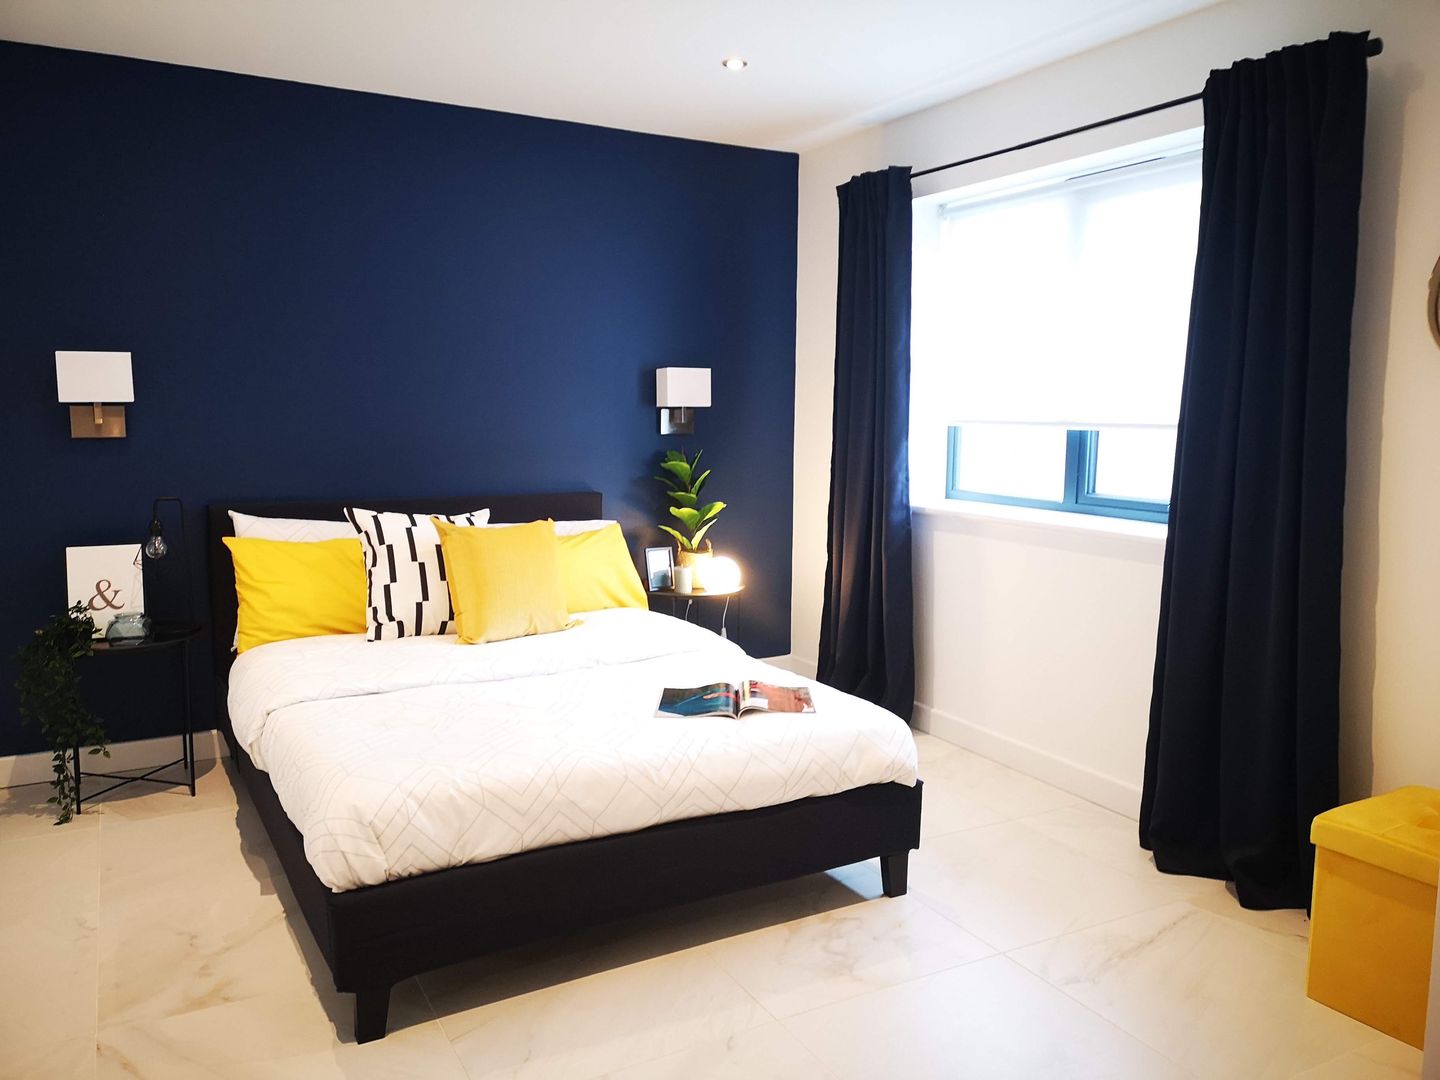 Contrasting navy bedroom THE FRESH INTERIOR COMPANY Small bedroom Marble Dulux sapphire salute mustard accessories Ikea curtains marble tiled floor